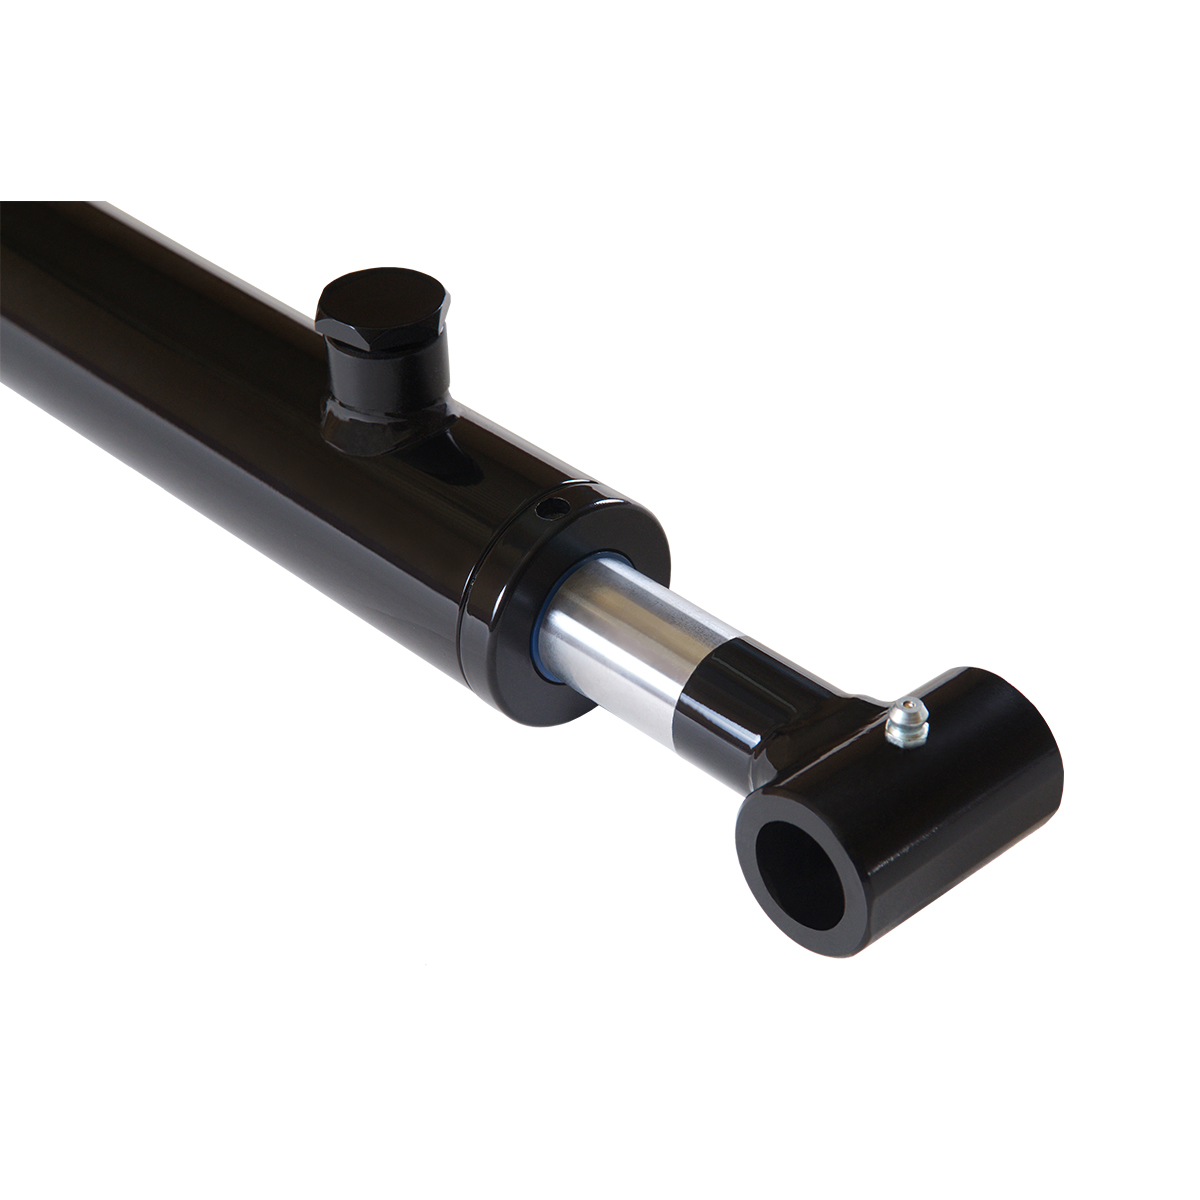 1.5 bore x 16 stroke hydraulic cylinder, welded cross tube double acting cylinder | Magister Hydraulics